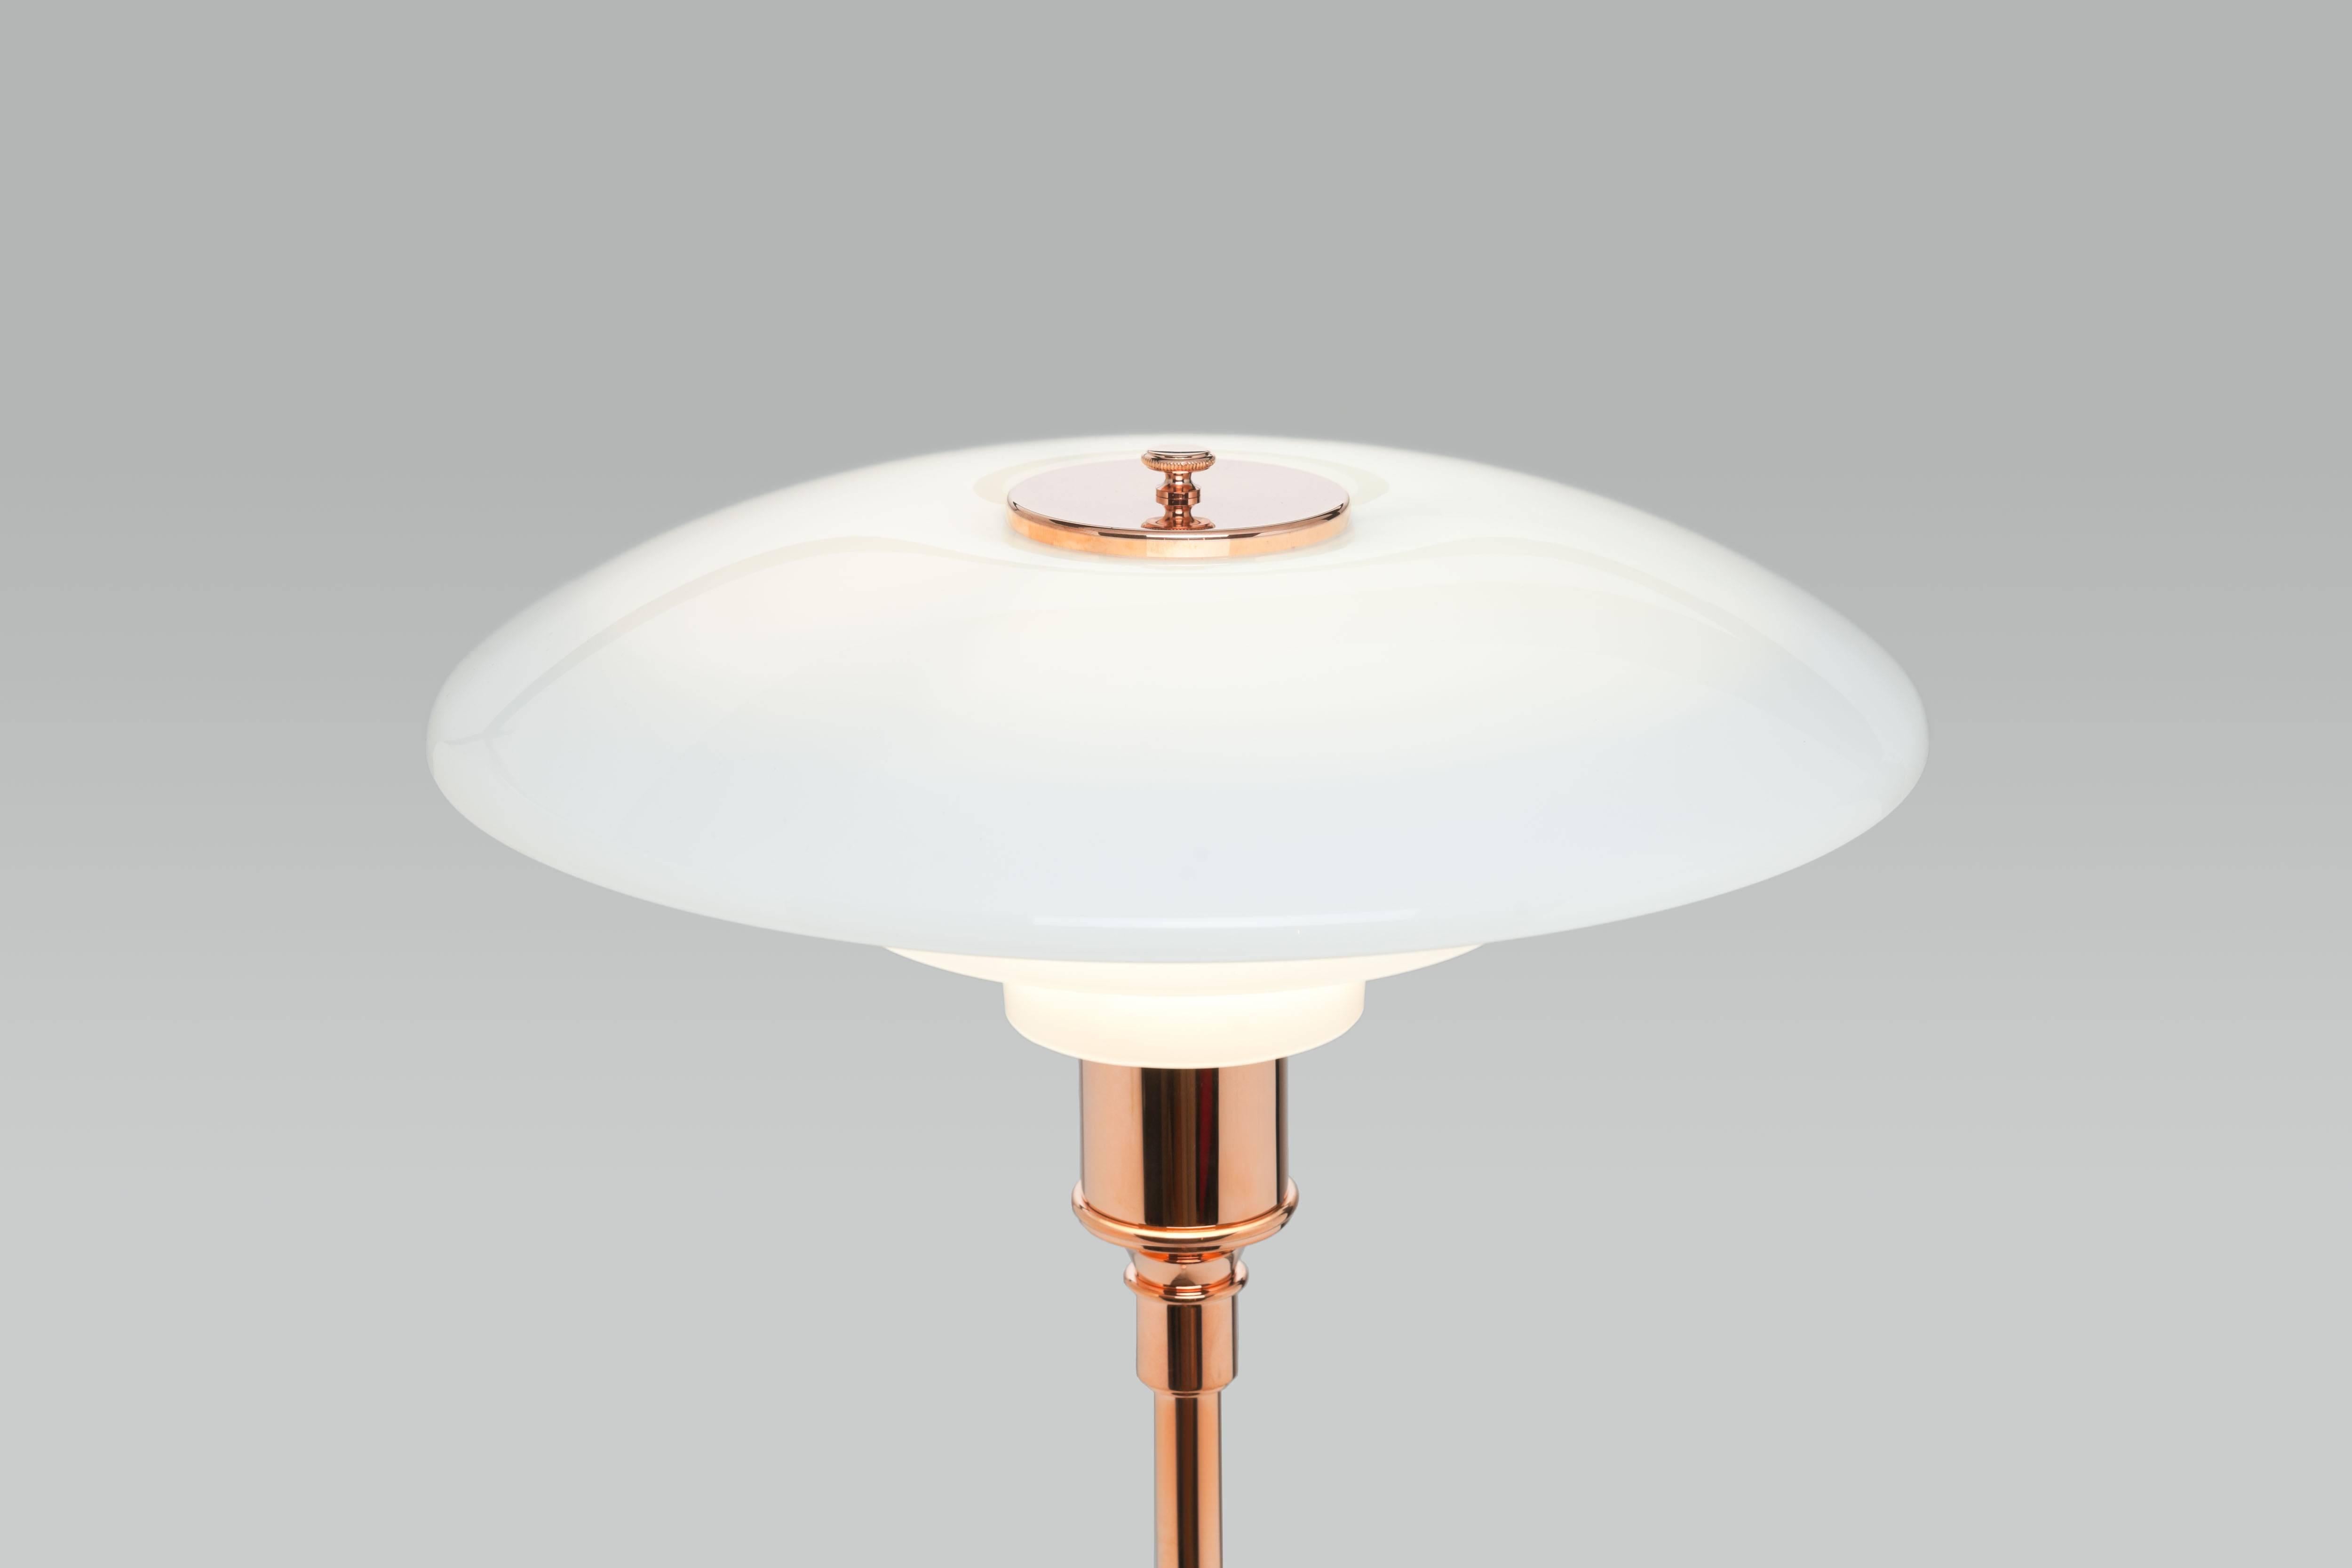 Contemporary Poul Henningsen Limited Edition PH 3½-2½ Copper and Glass Floor Lamp